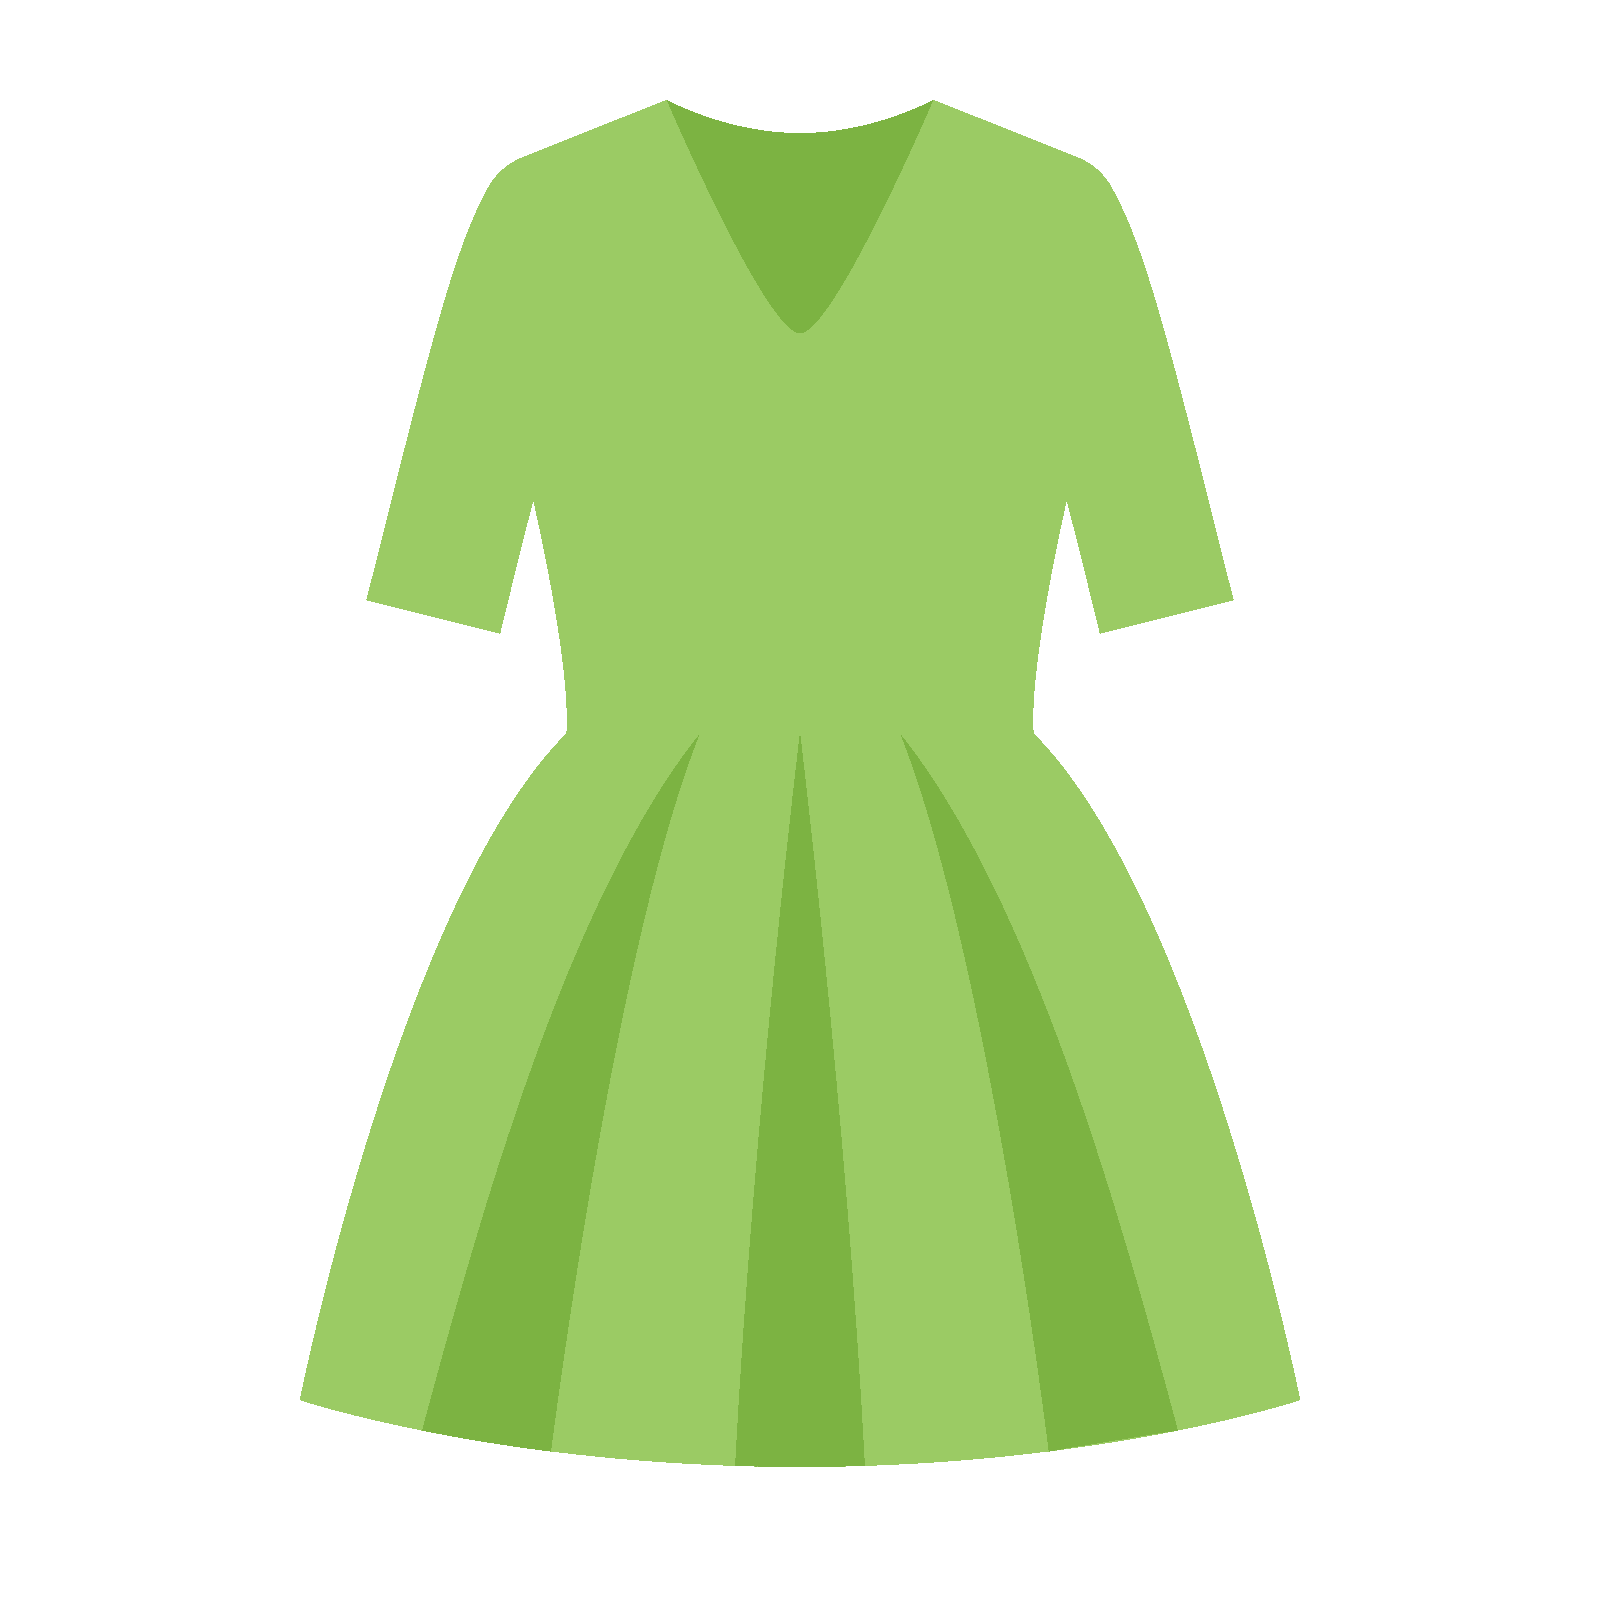 Dress PNG images free download